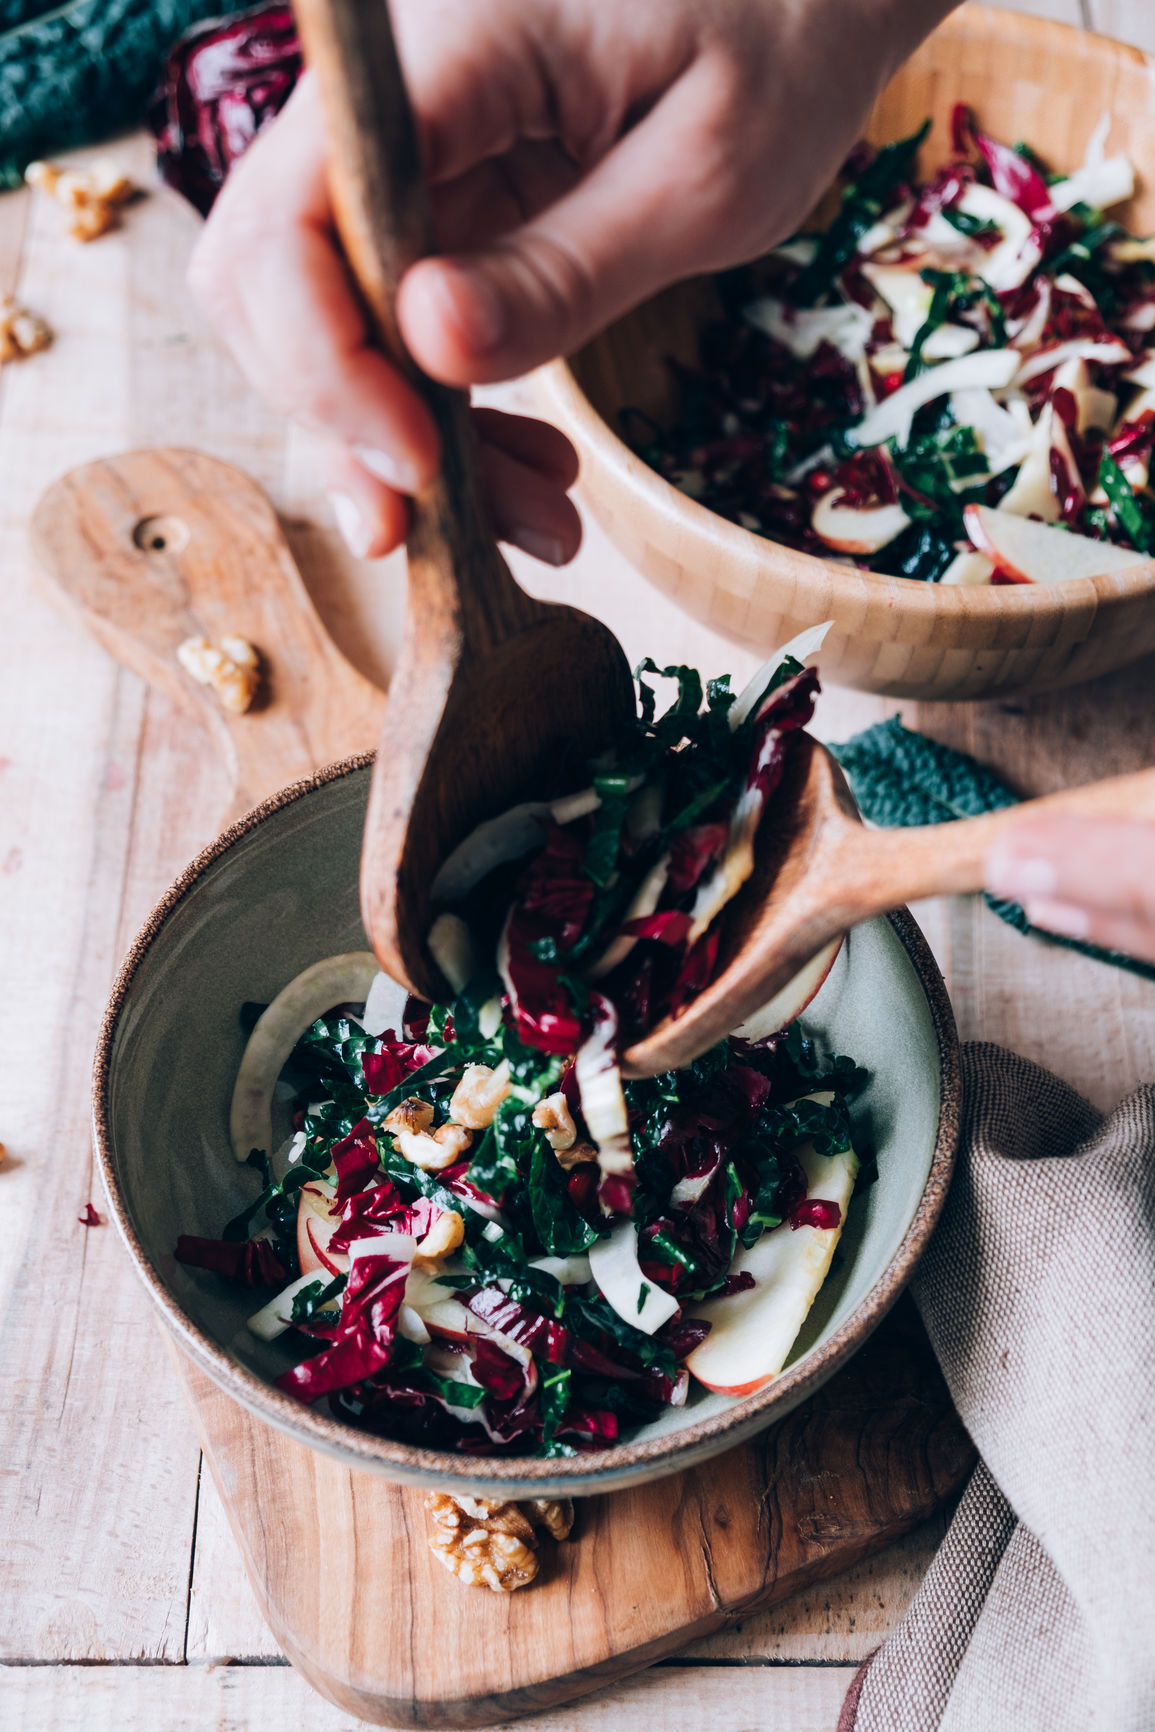 Delicious salad with kale, radicchio, walnuts, apple, fennel and pomegranate